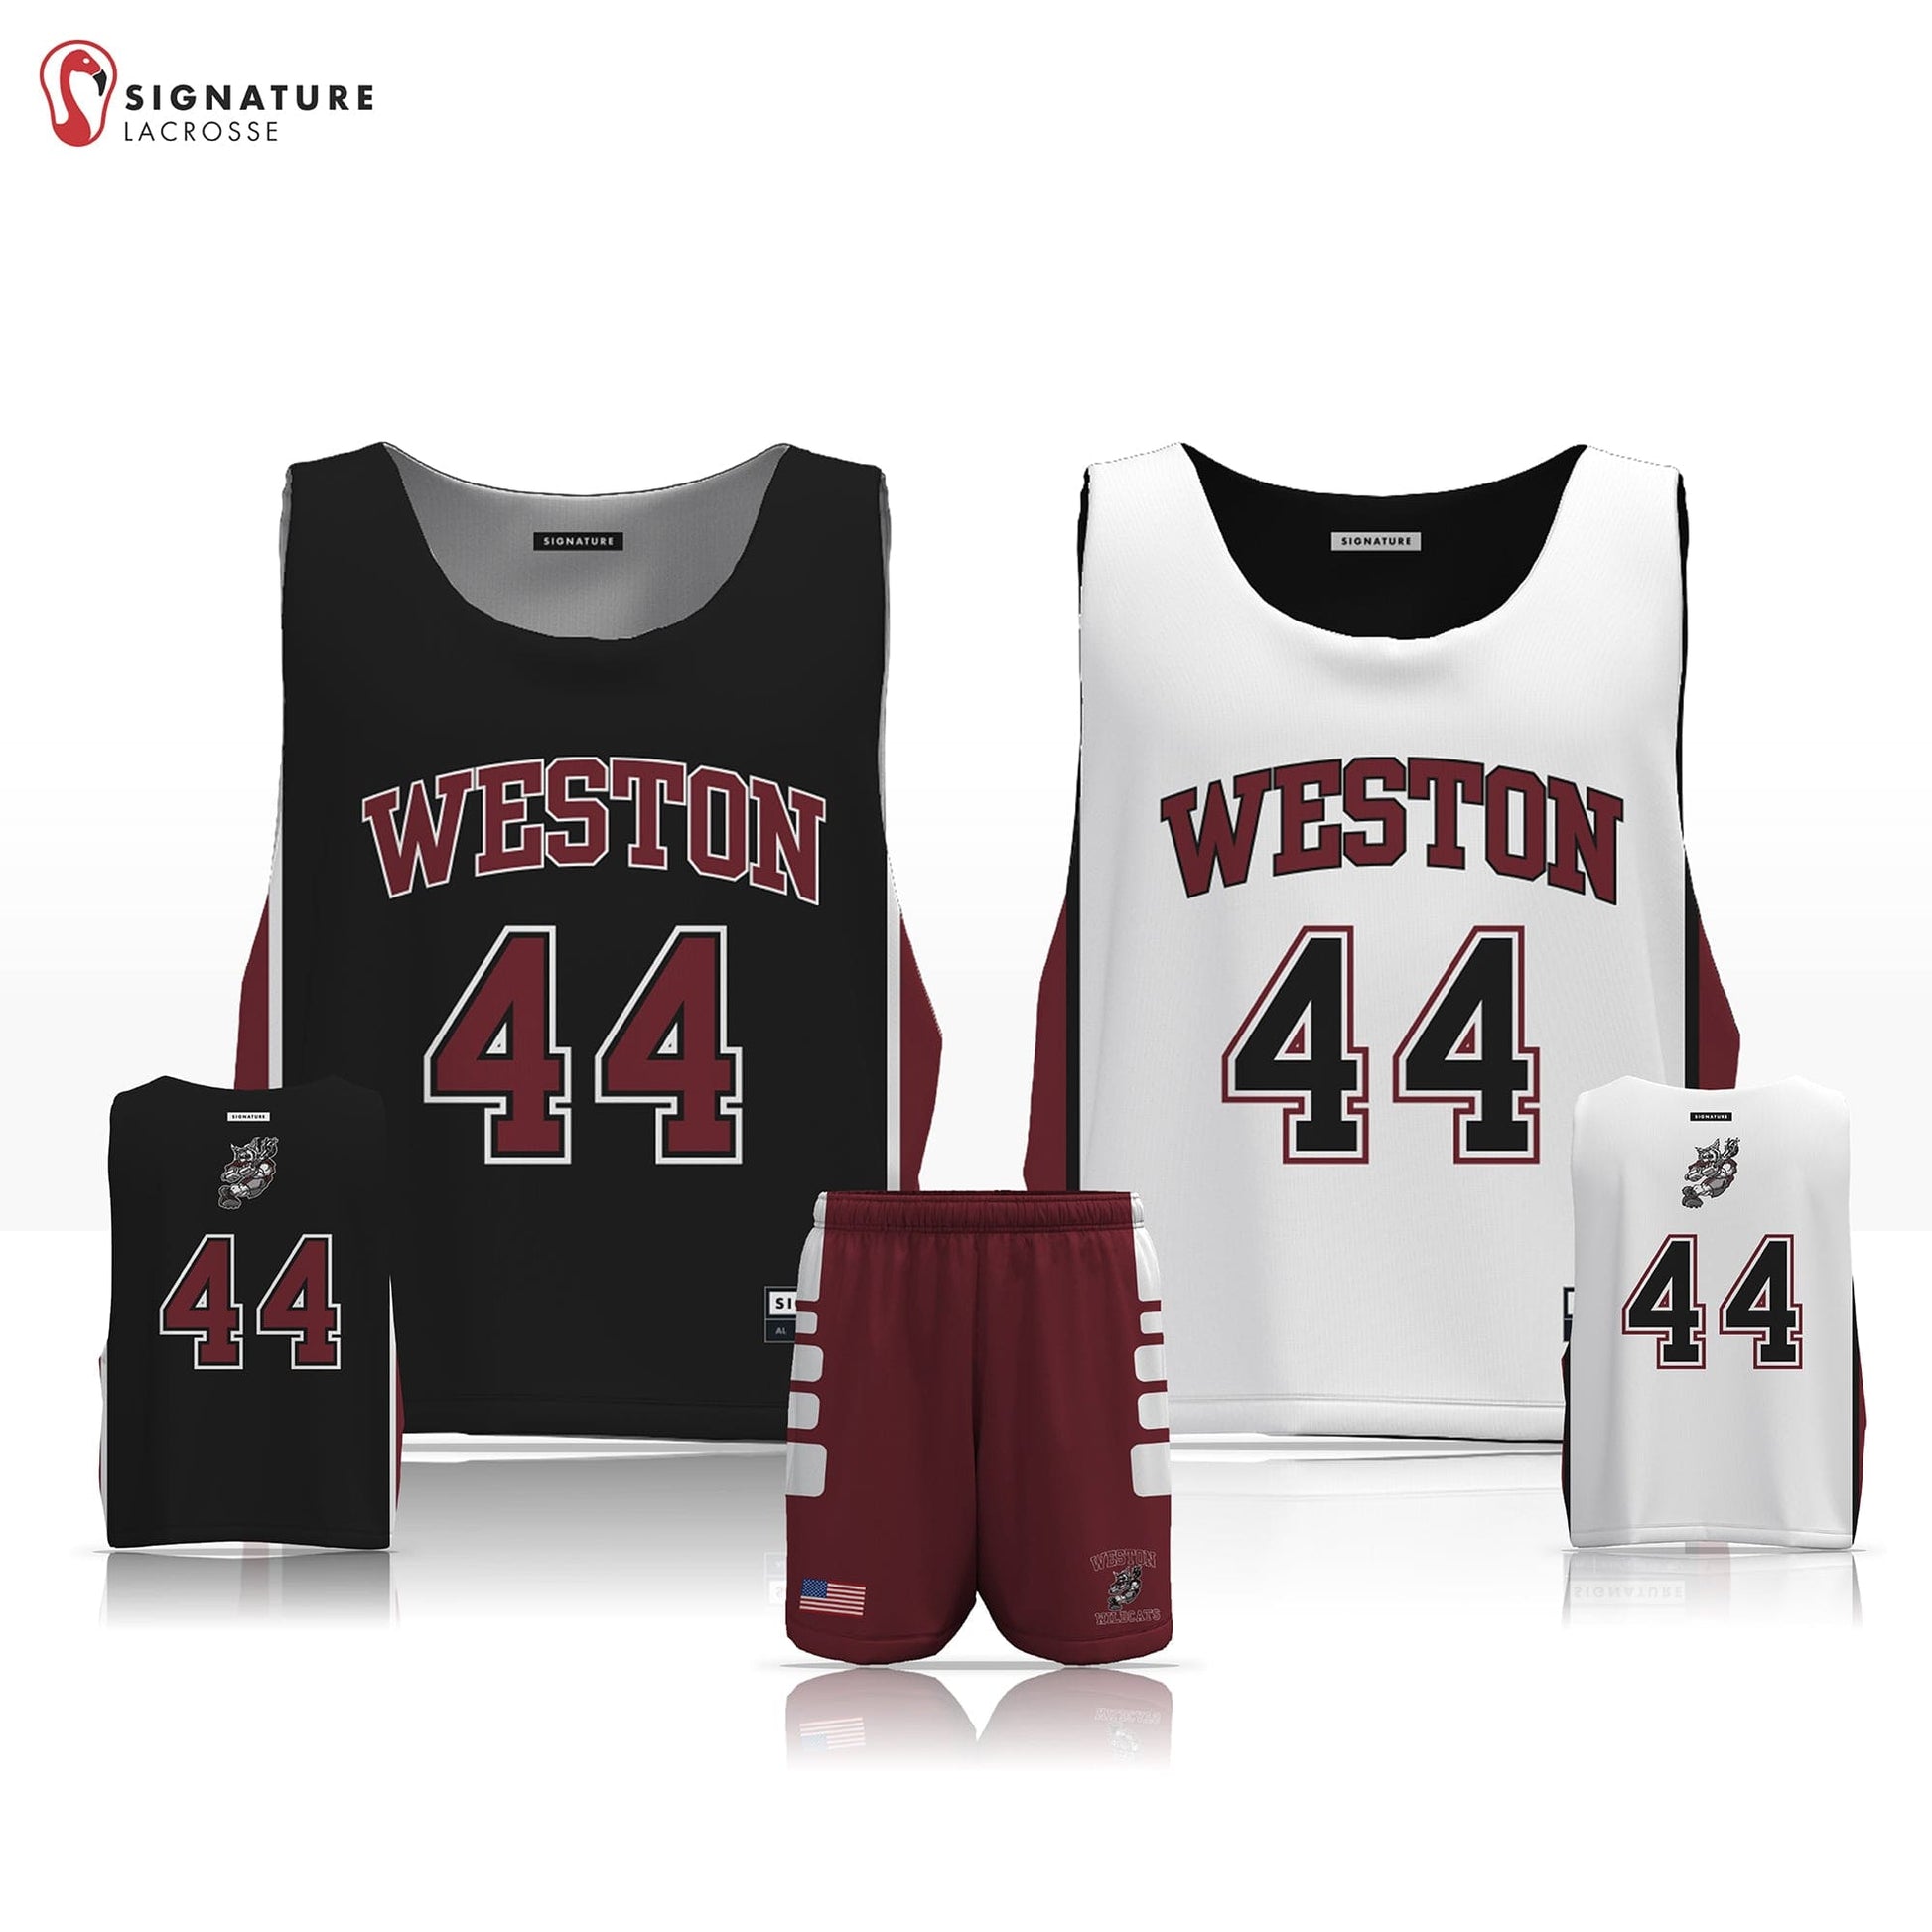 Weston Youth Lacrosse Men's 2 Piece Player Game Package: Grade 1-2 Signature Lacrosse